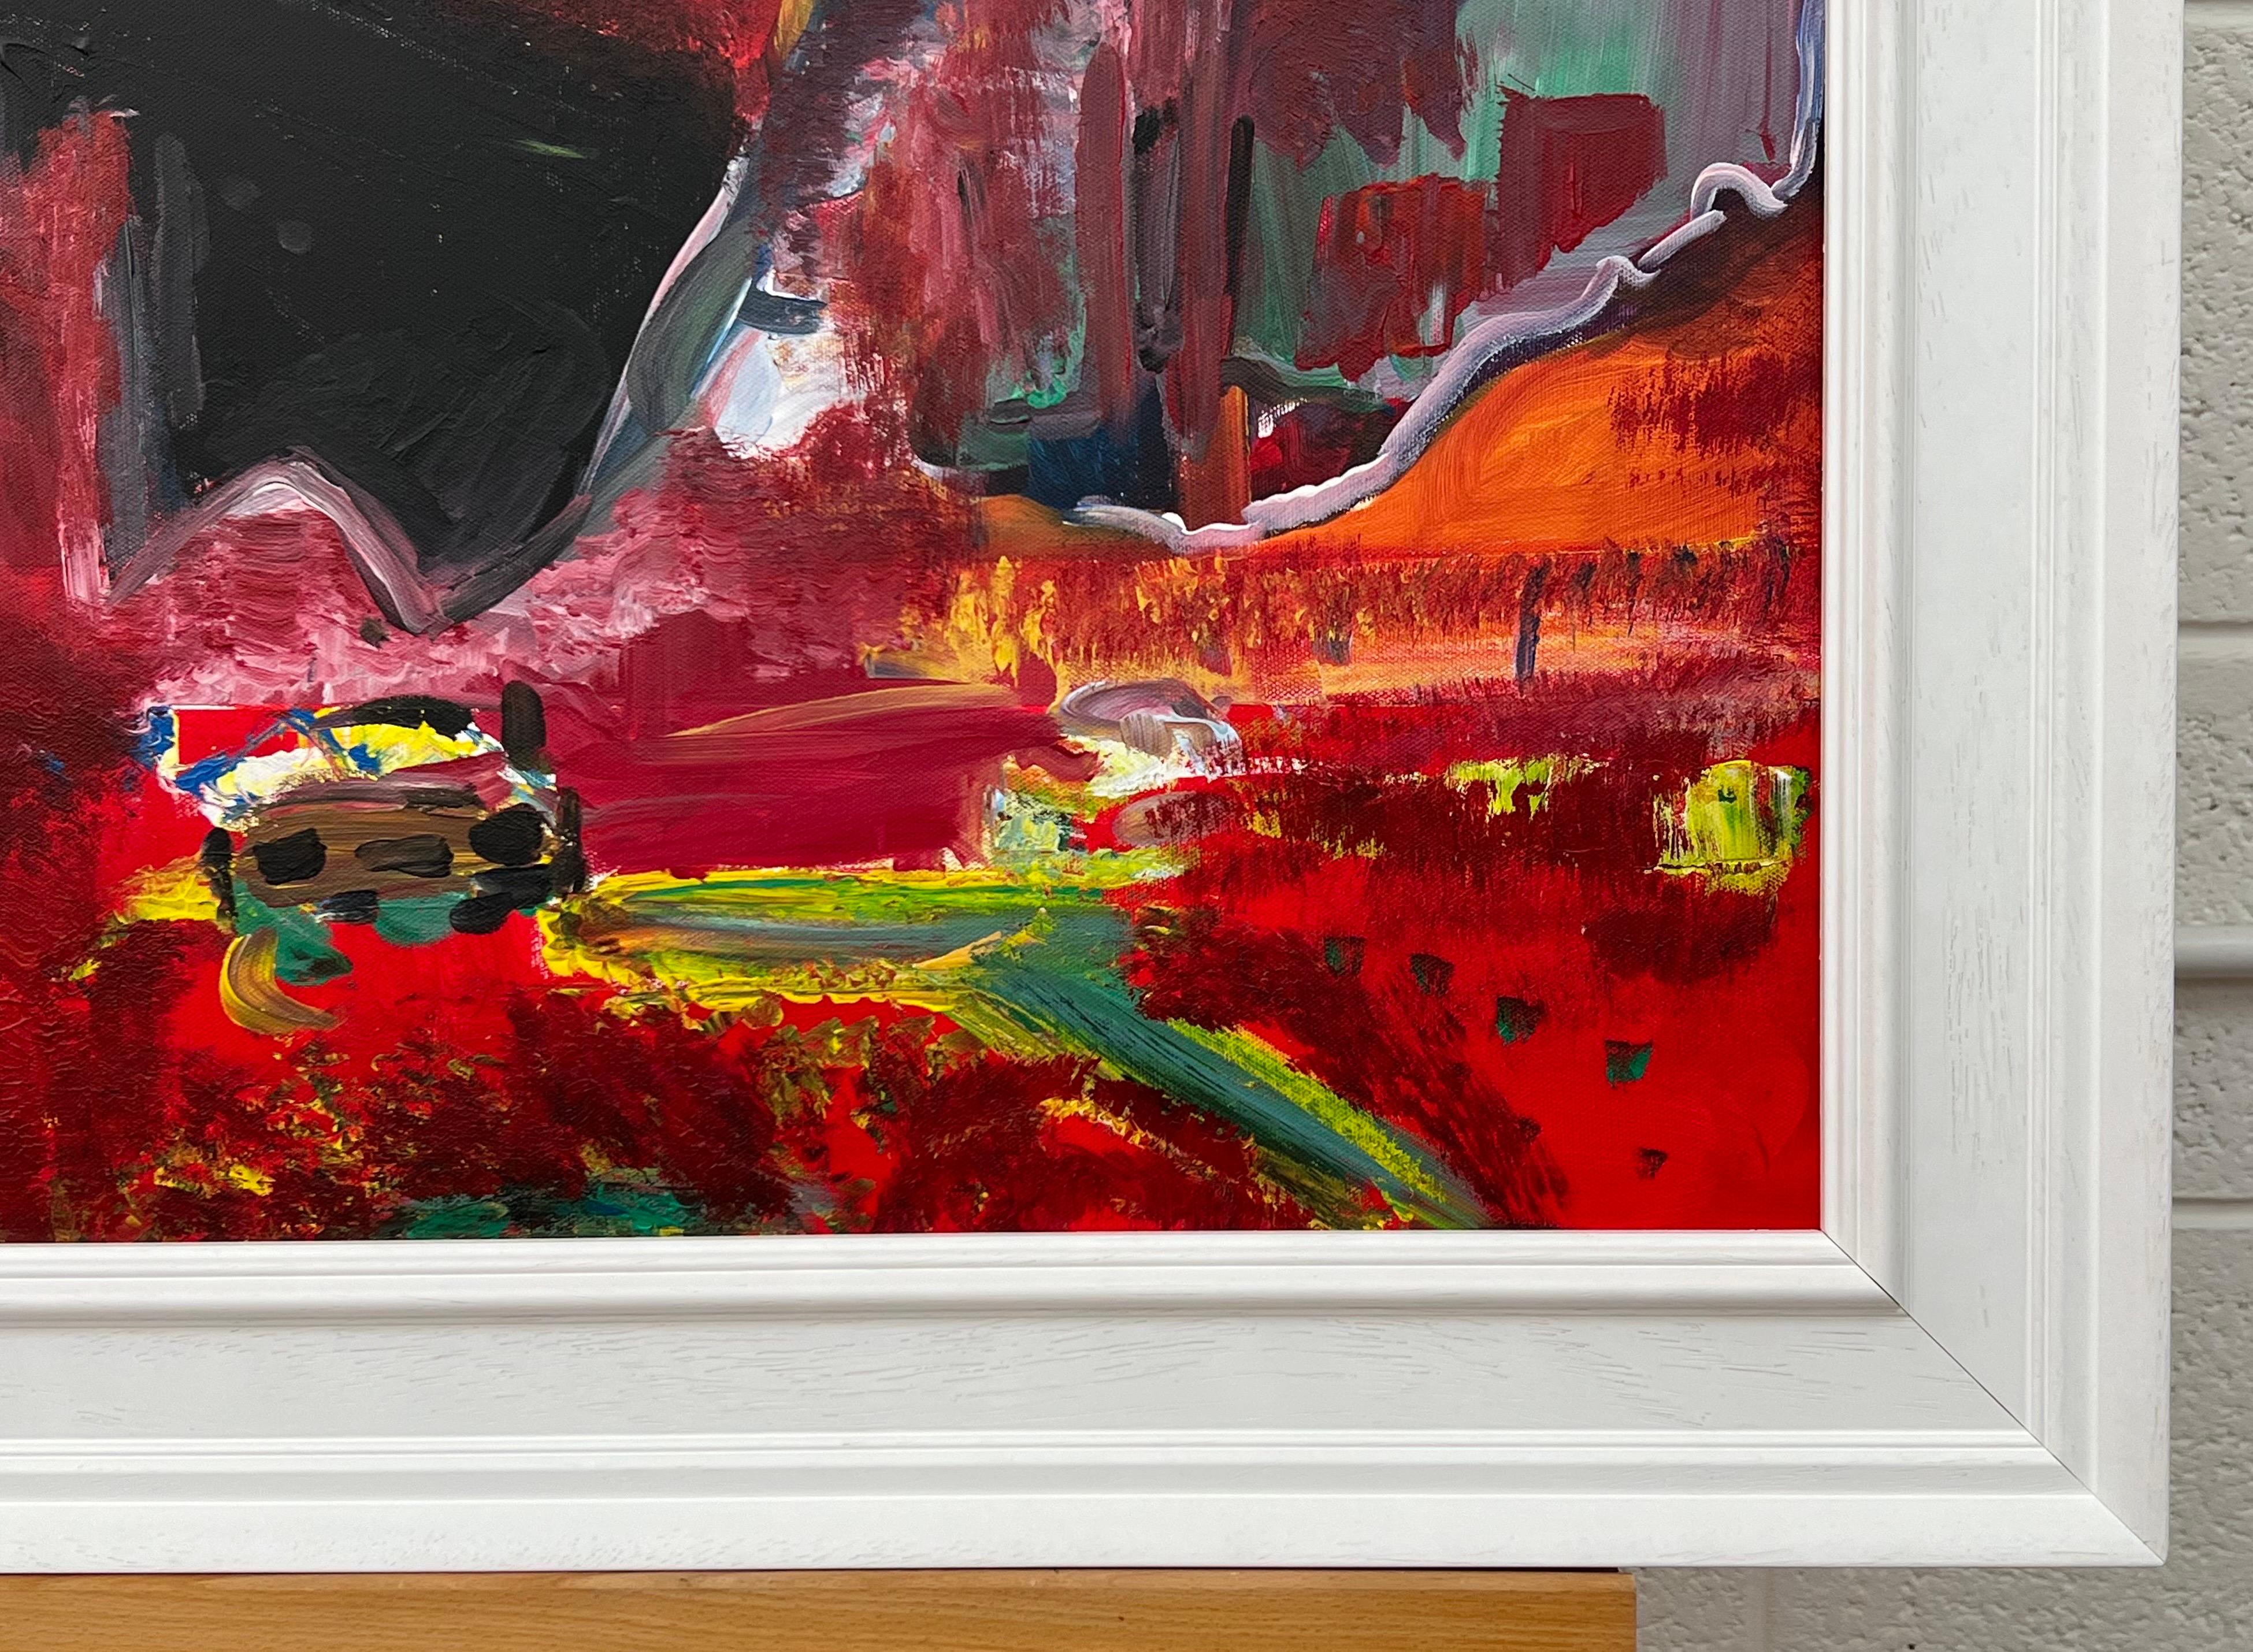 Colourful Psychedelic Abstract Landscape Painting of Urban City Scene, using bold bright red and primary colours, by leading British Urban Artist Angela Wakefield.

This artwork is from an intense body of abstract work that formed the very